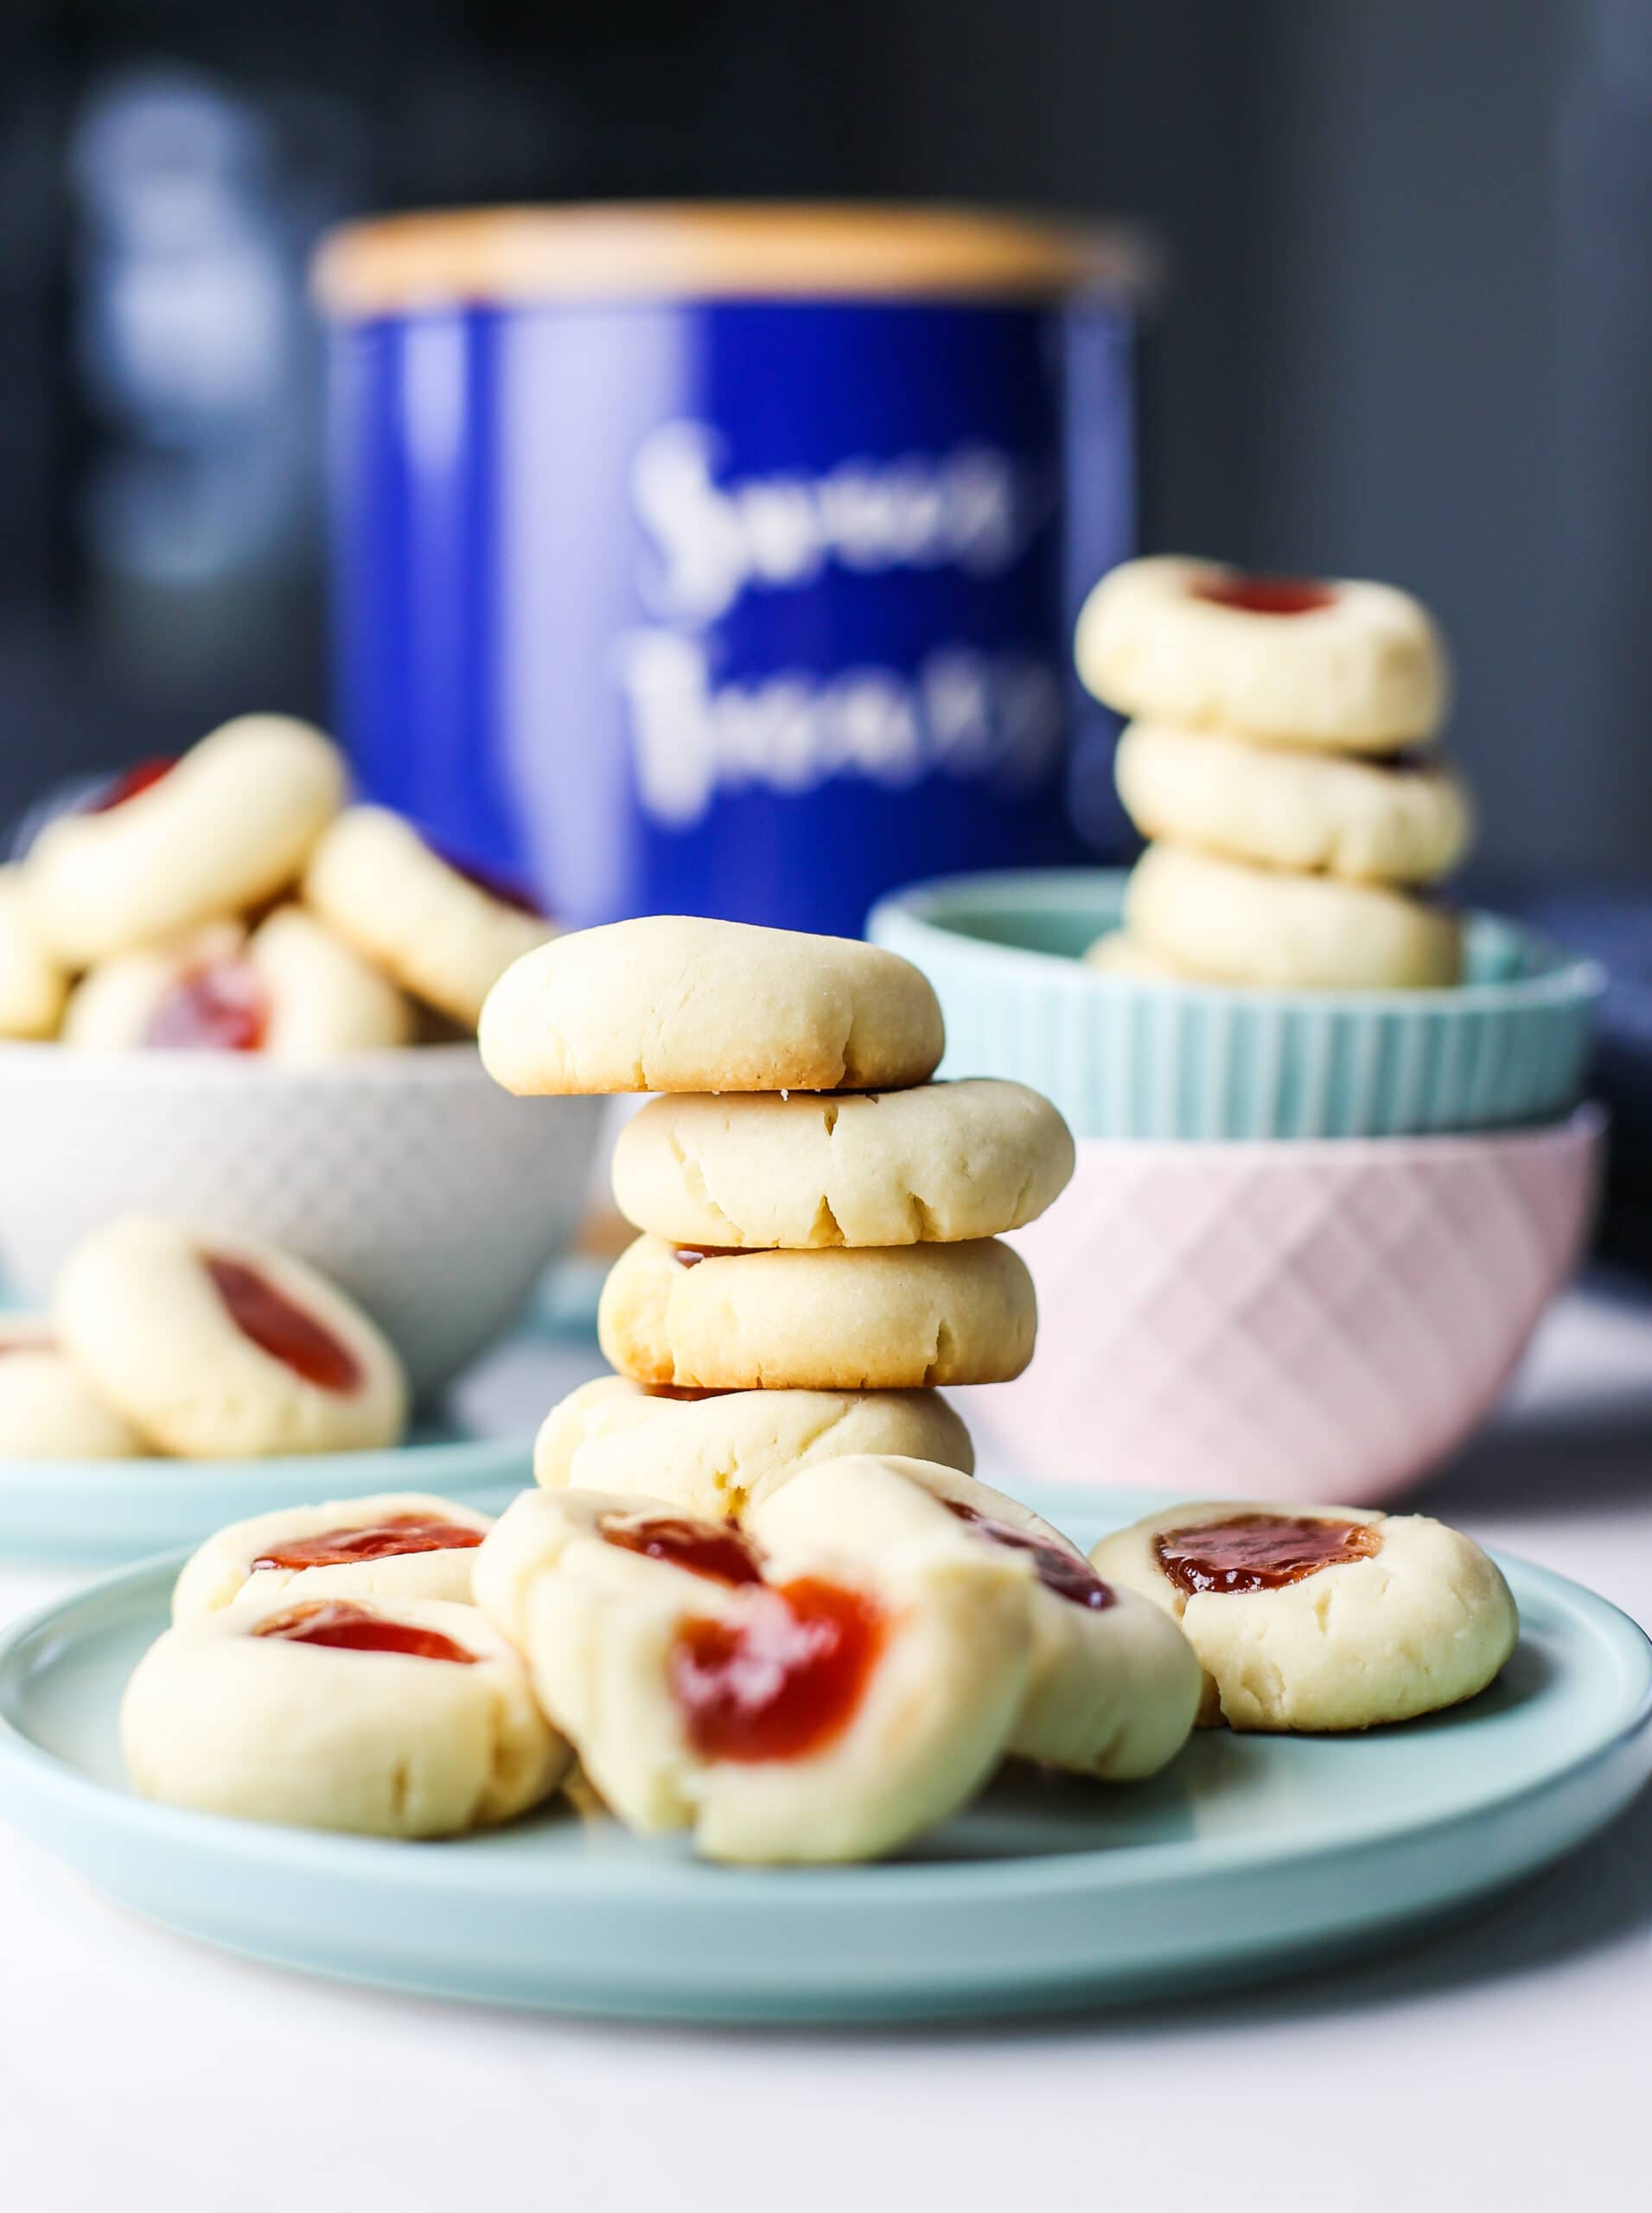 Condensed milk thumbprint cookies piled in two bowls and on a plate.